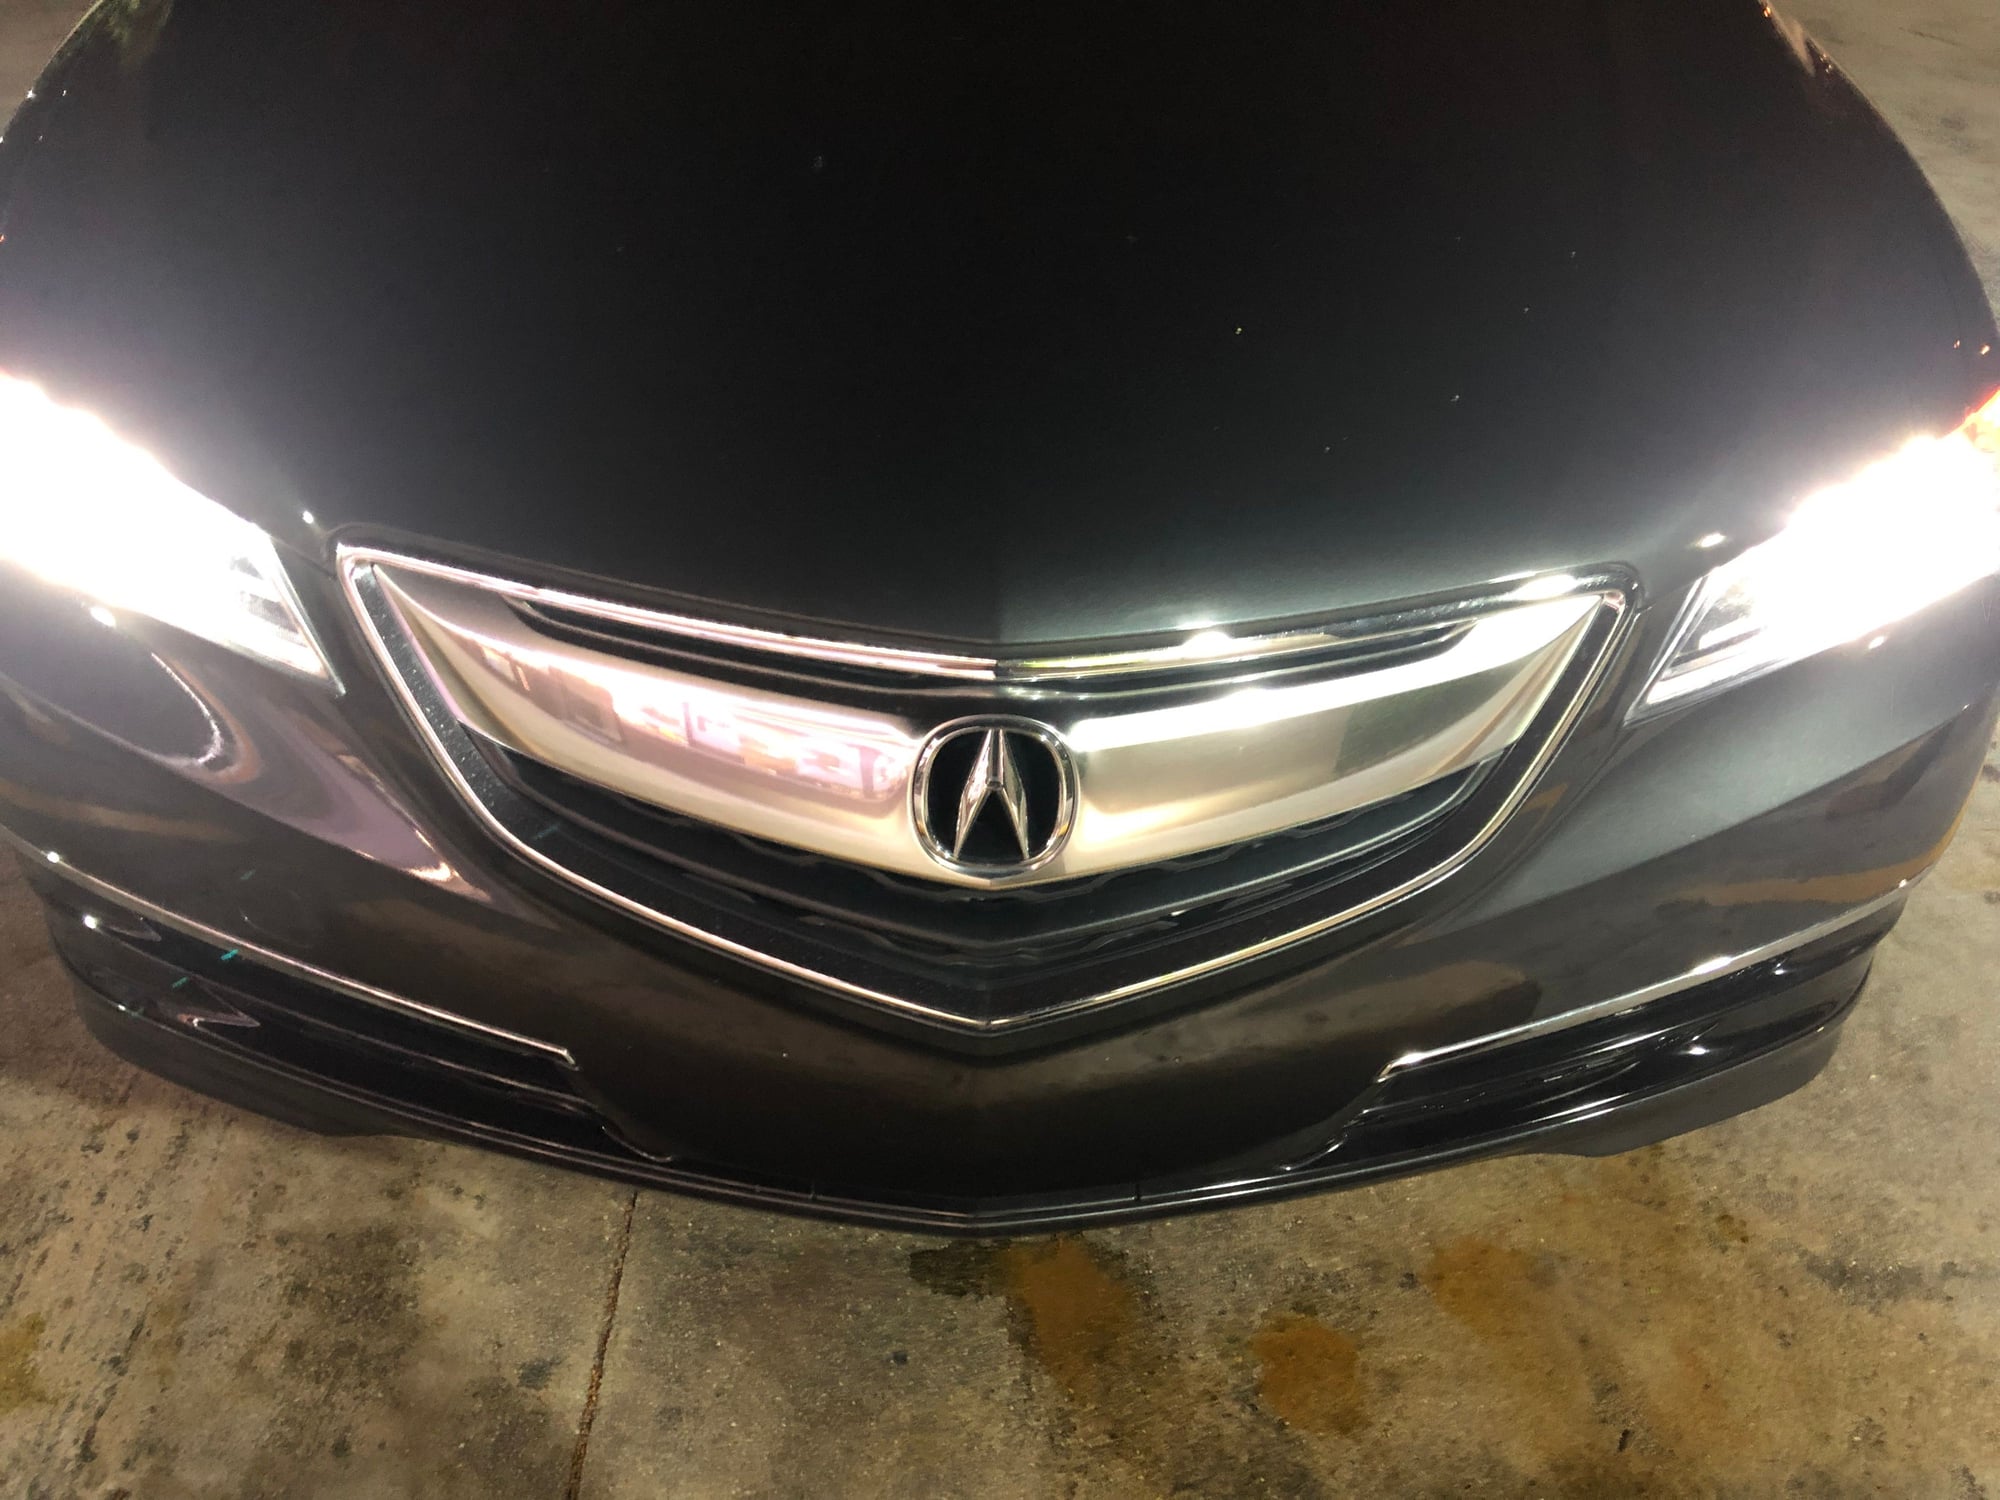 Lights - FS: Acura TLX headlights led - Used - 2015 to 2017 Acura TLX - West Palm Beach, FL 33406, United States